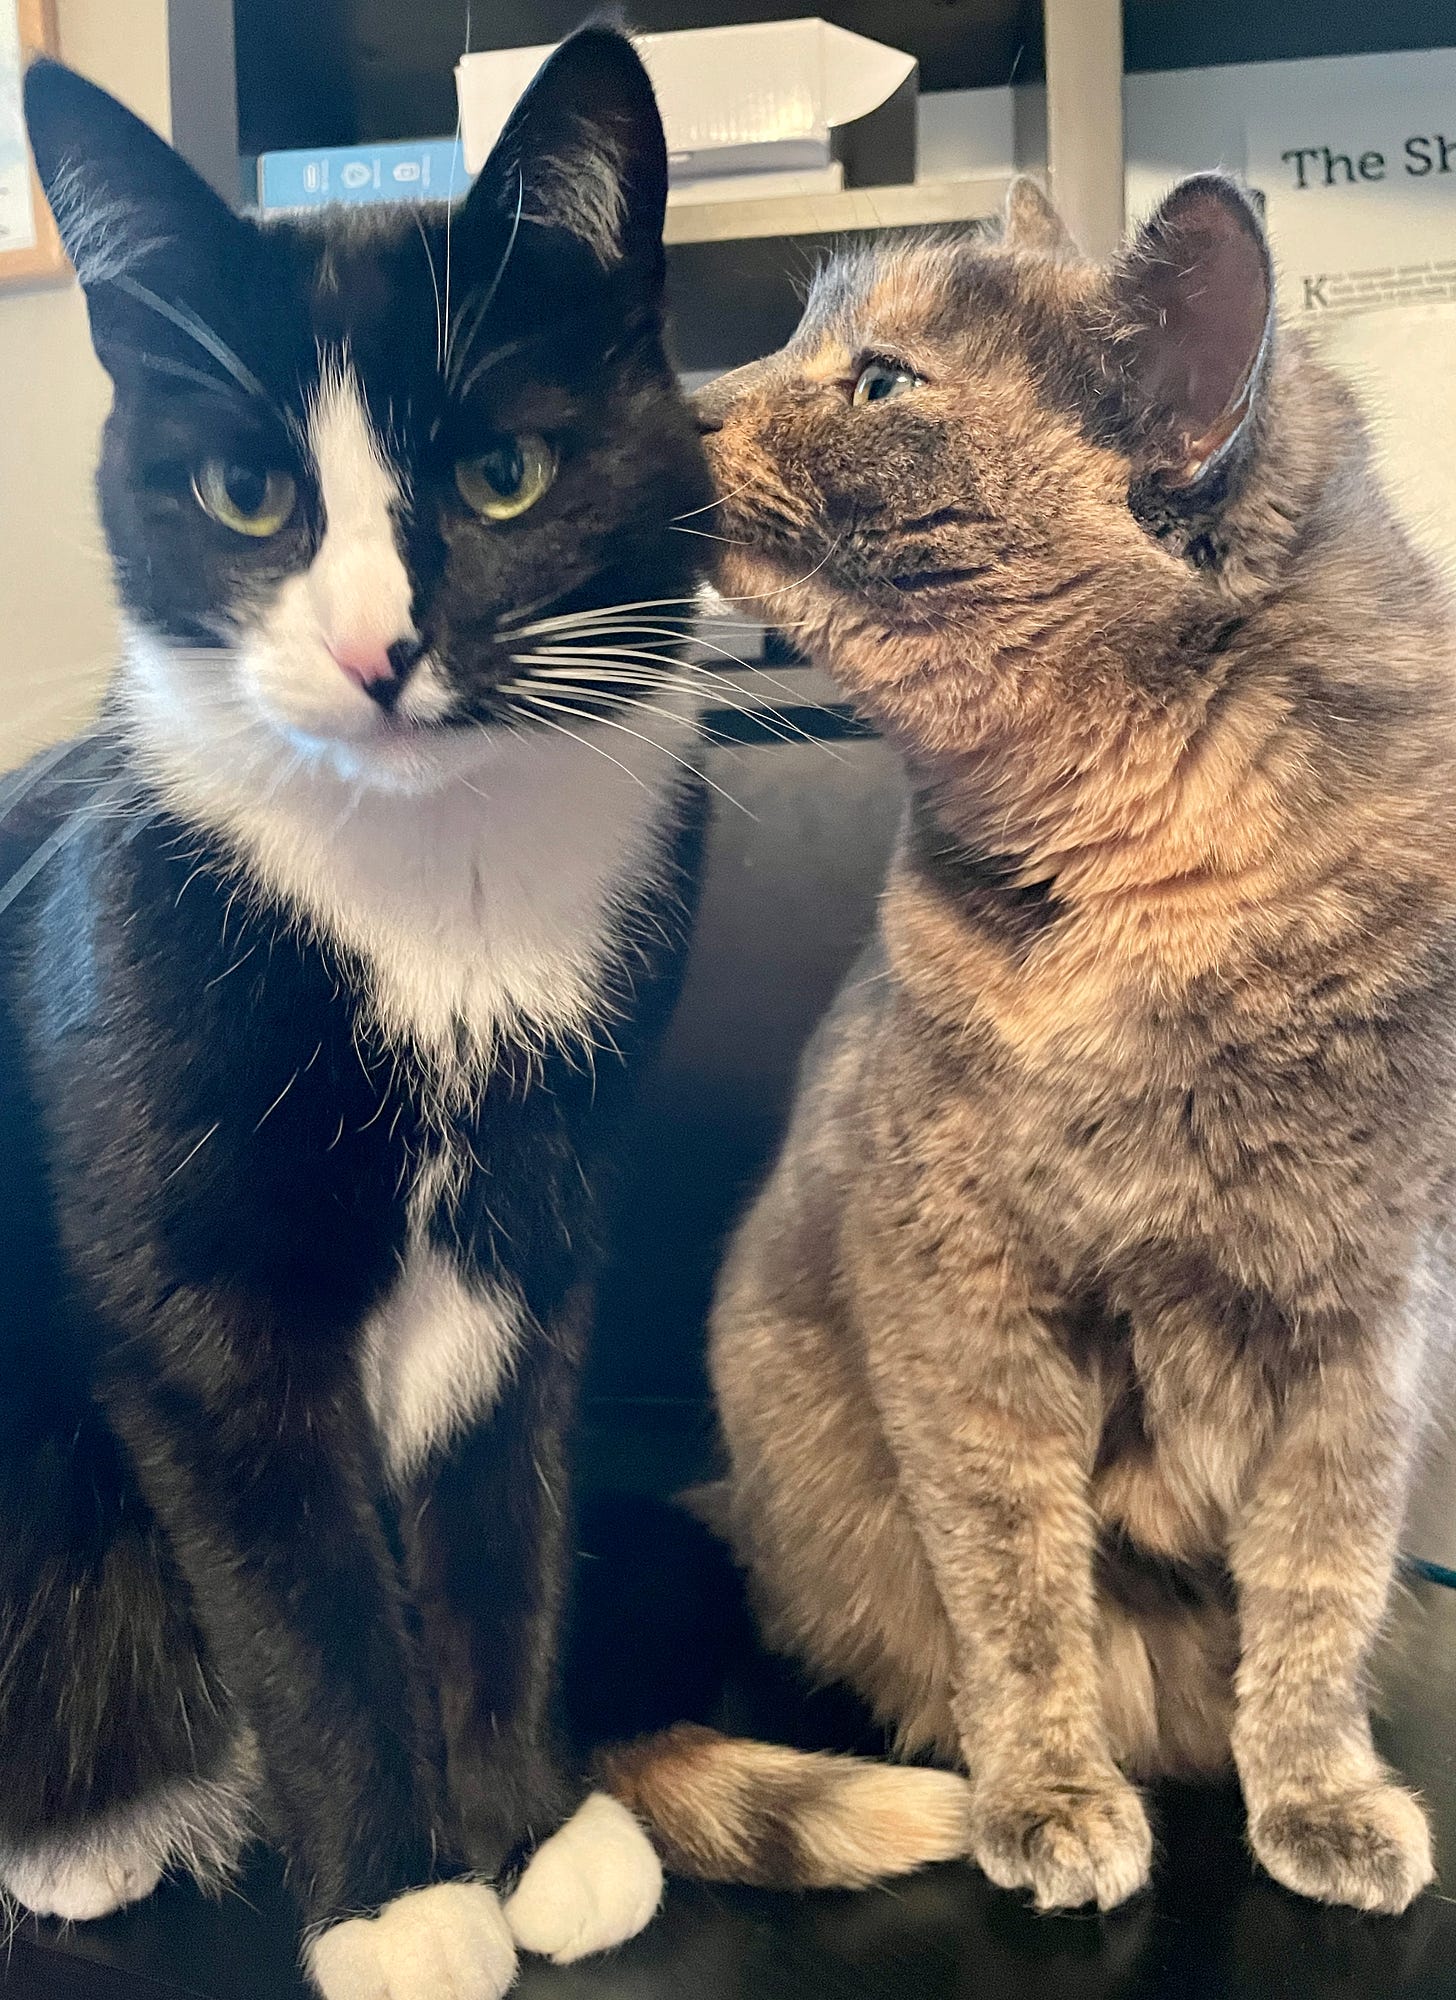 Two cats sit on a black desk. On the left, a tuxedo cat faces the camera; on the right, a dilute tortie has her body facing the camera as well, but she has turned her head to lick her brother’s cheek.